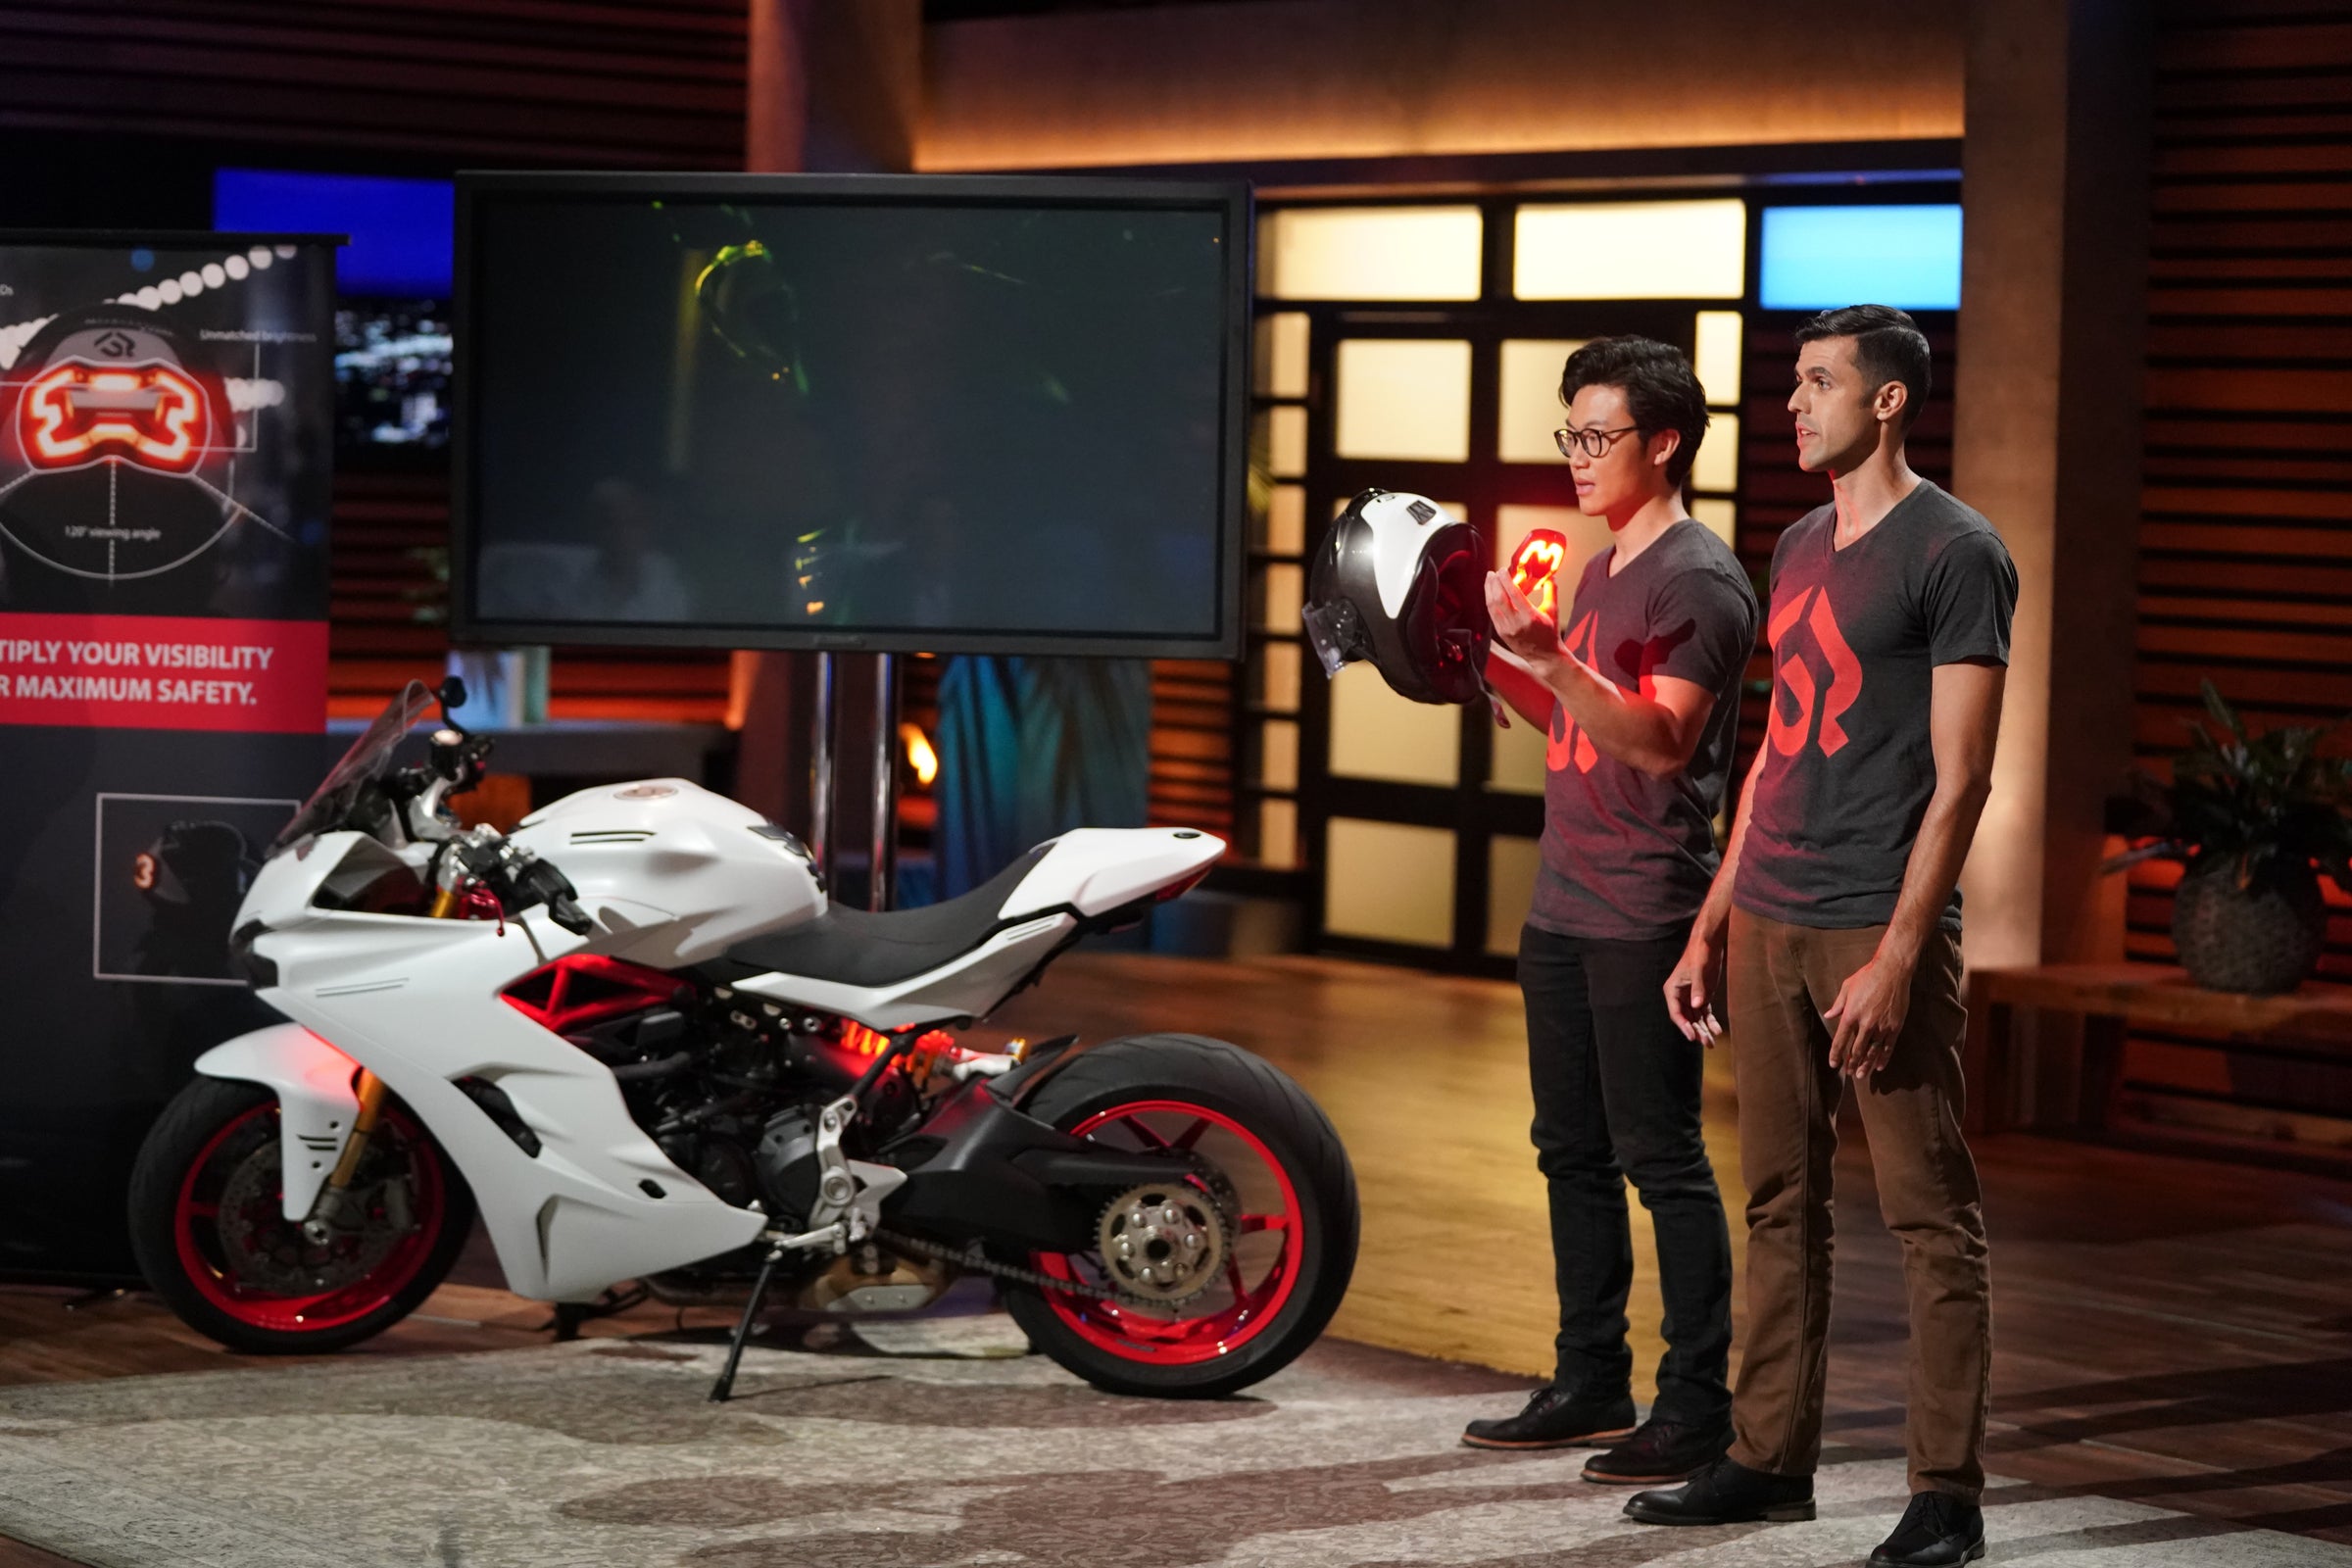 Alex Arkhangelskiy (CEO) and Henry LI (COO) appearing on ABC's Shark Tank Season 12 episode 8. Pitching Brake Free to Mark Cuban, Robert Herjavec, Barbara Corcoran, Lori Greiner, and Kevin O'Leary